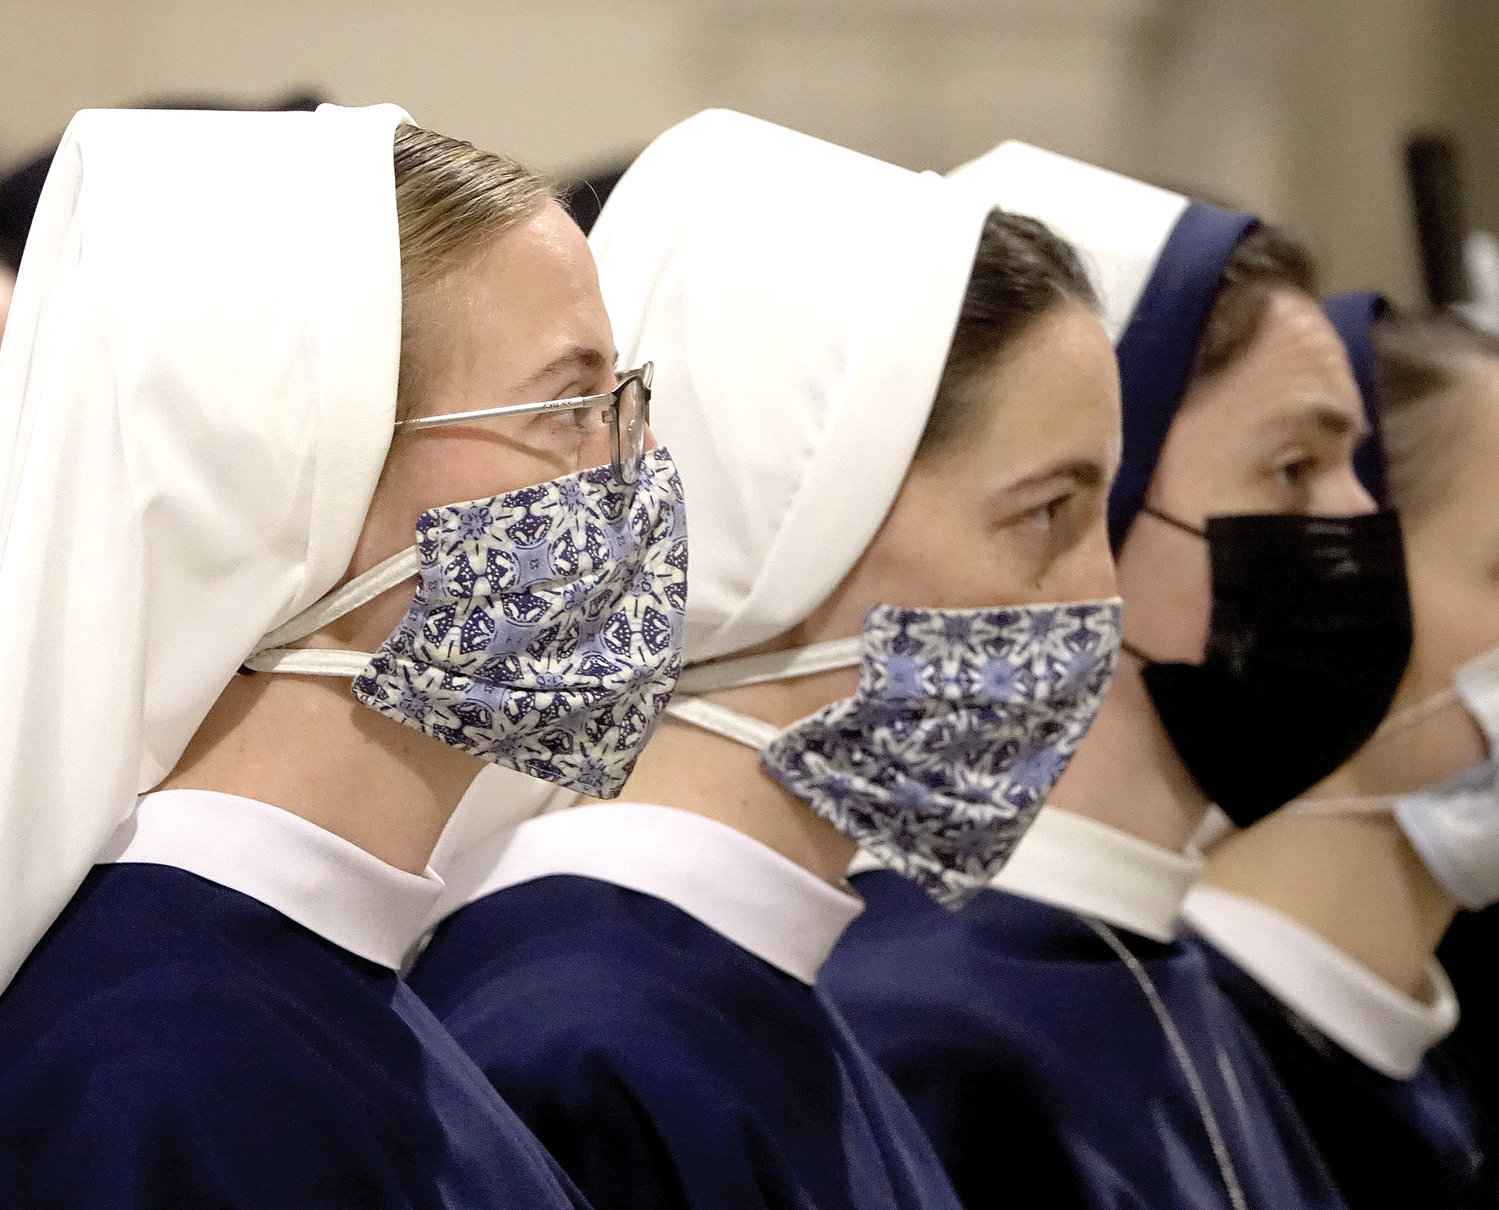 Several Sisters of Life form part of a group at the Mass.